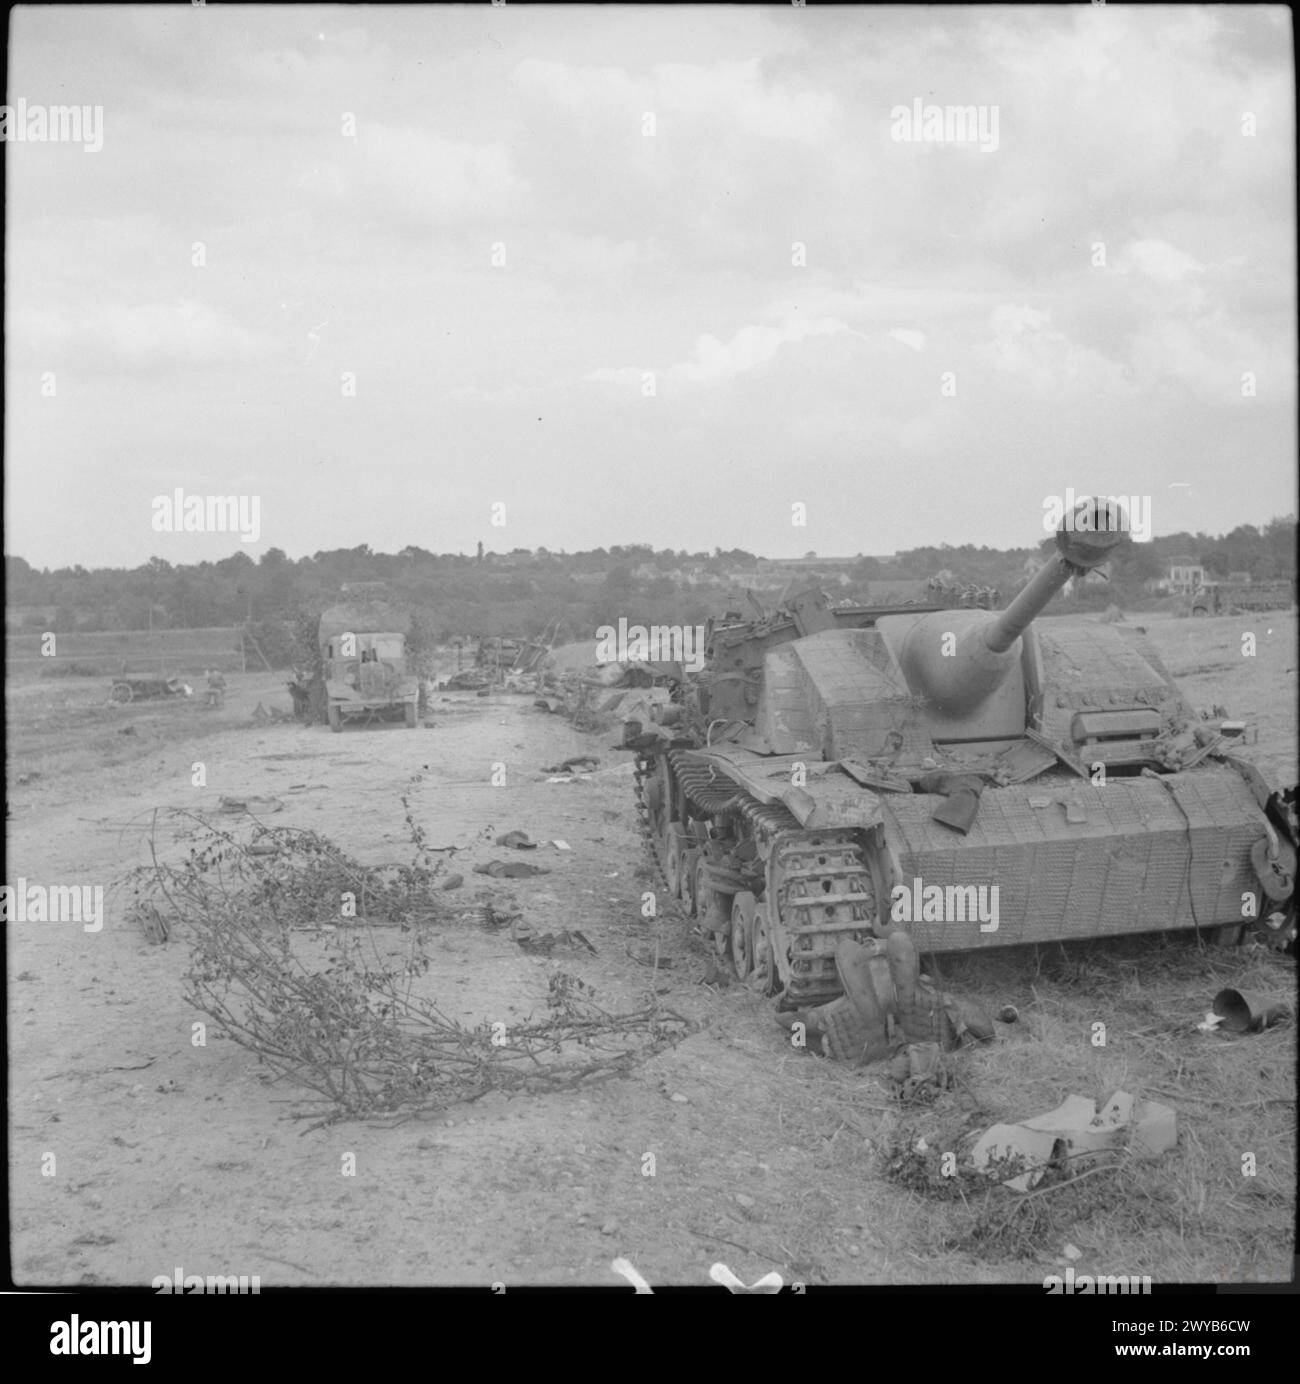 THE BRITISH ARMY IN THE NORMANDY CAMPAIGN 1944 - Knocked-out German StuG III assault gun and soft-skin vehicles shot up by Allied fighter-bombers, 21 August 1944. , Stock Photo